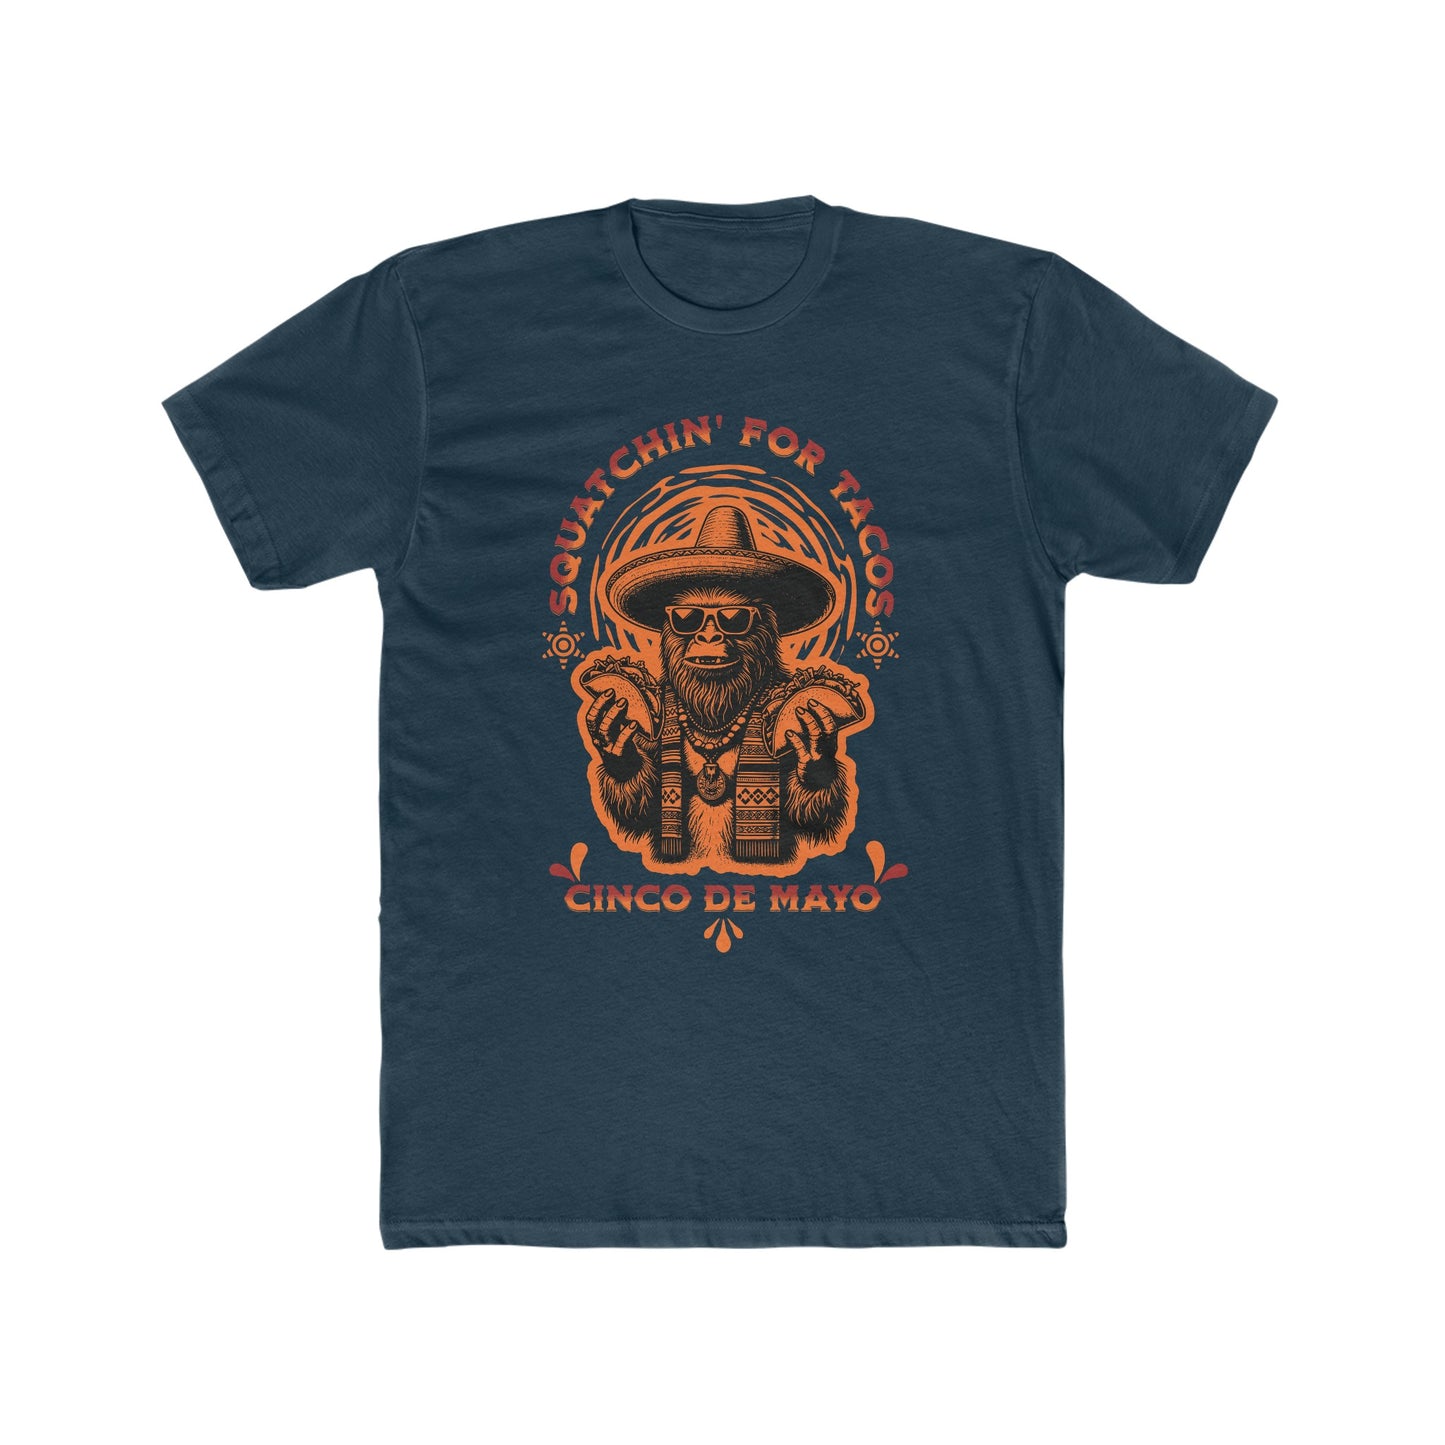 Squatchin' for Tacos Unisex Next Level 3600 Tee - Color